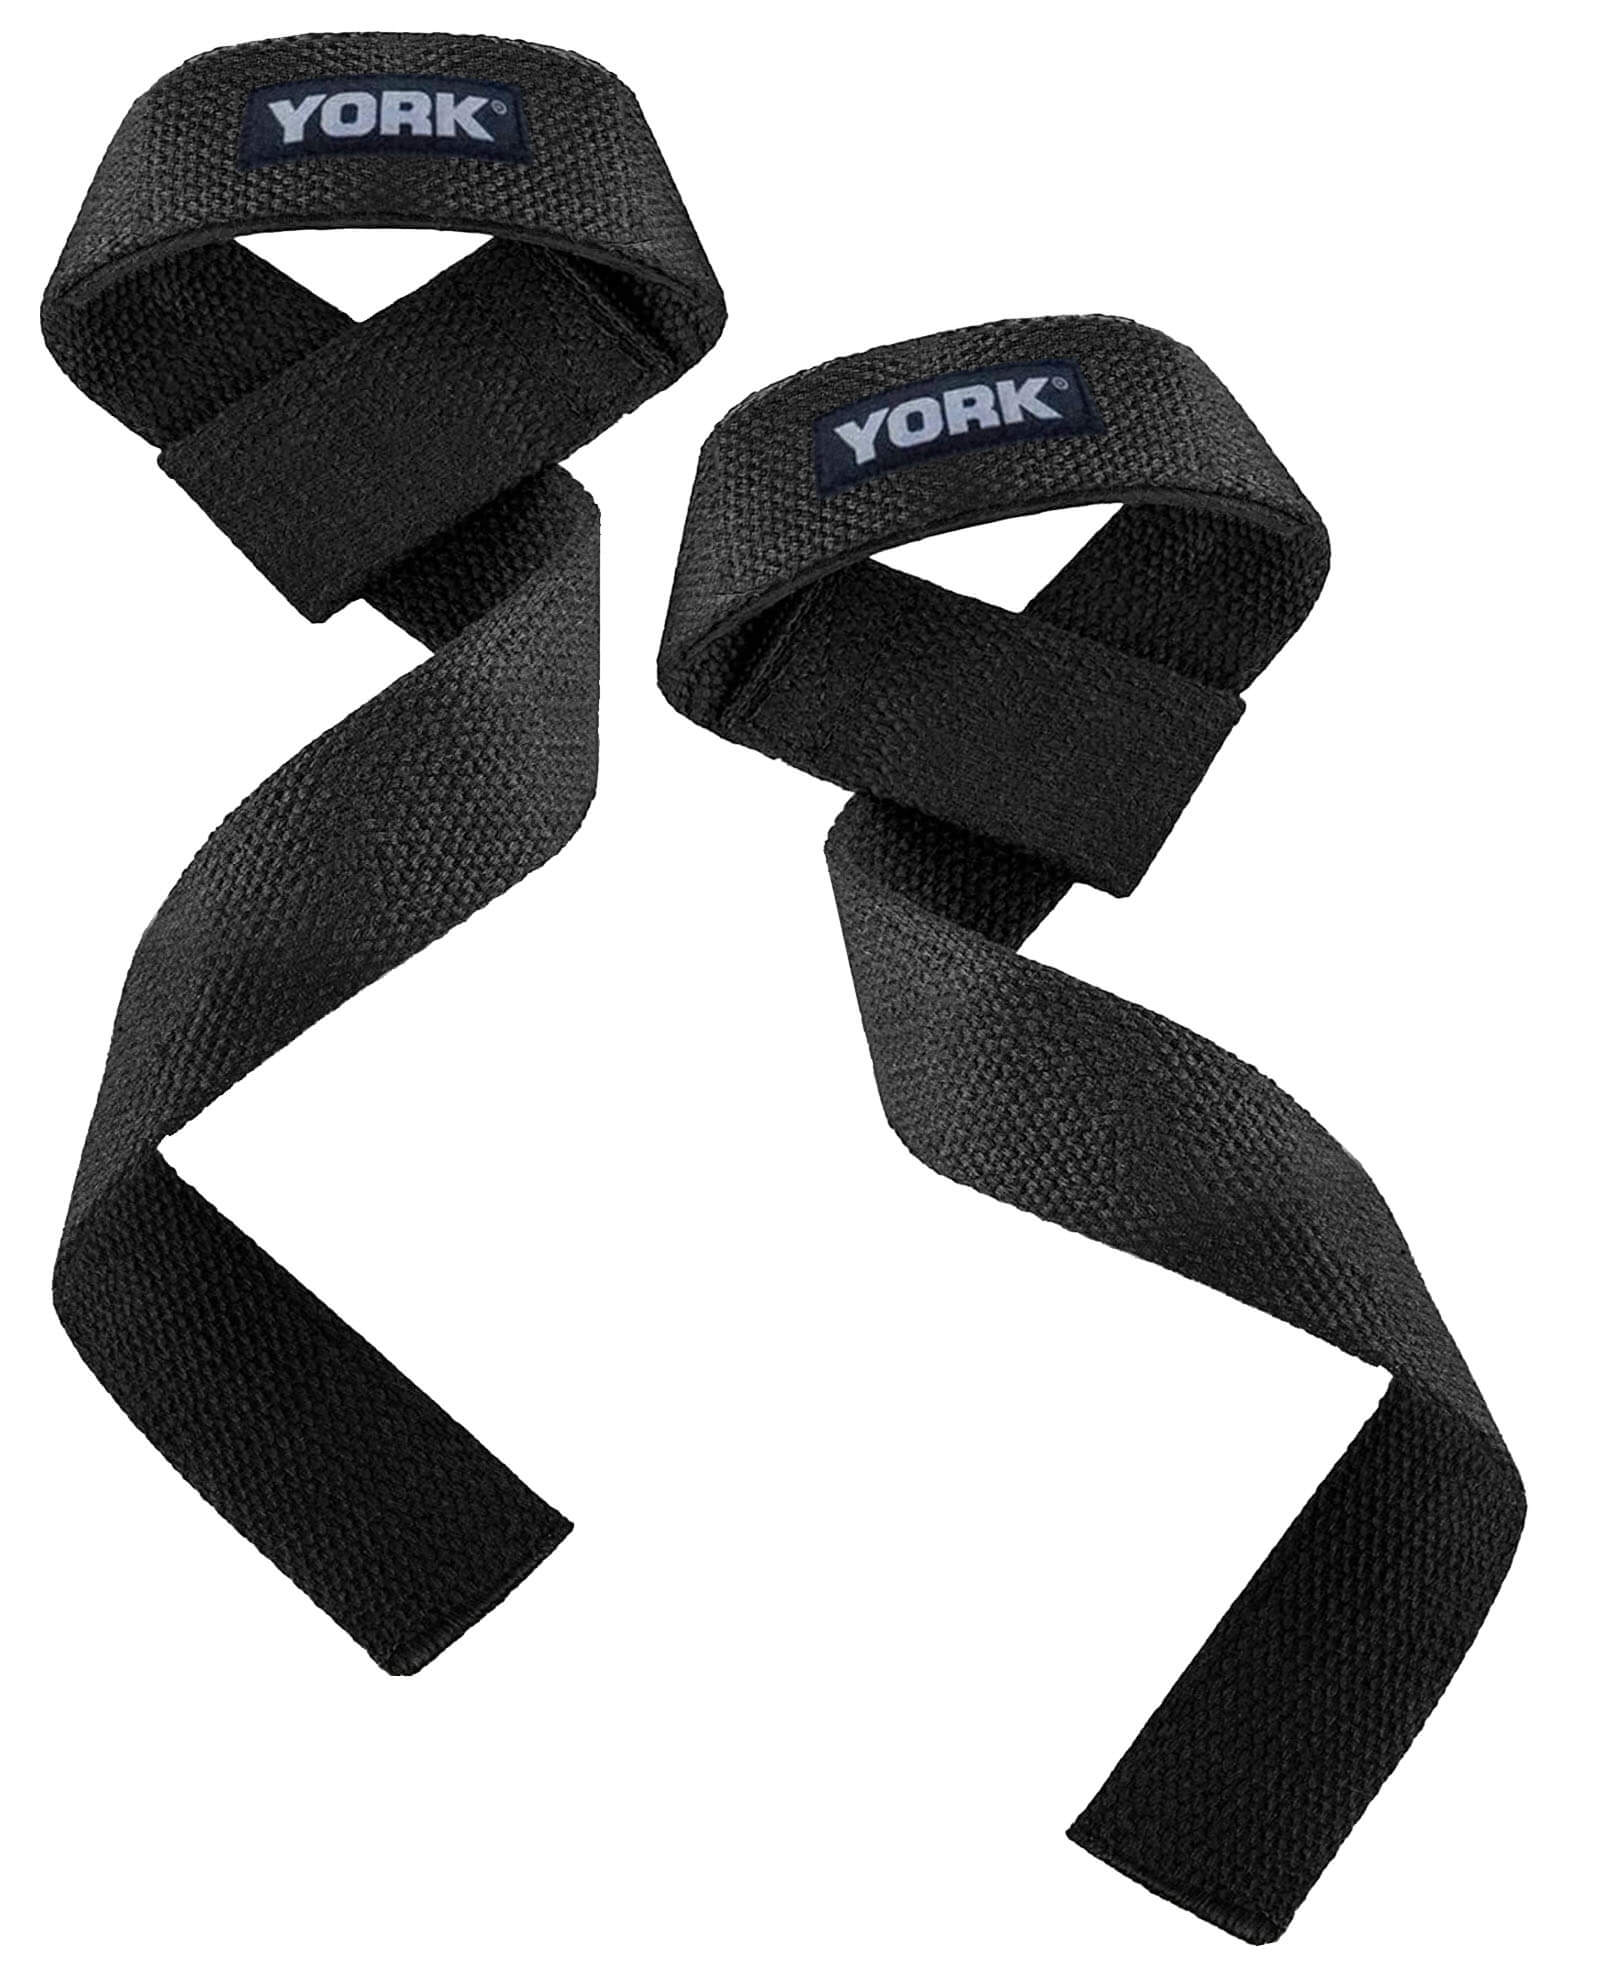 York Fitness Weightlifting Straps, Weightlifting Accessories